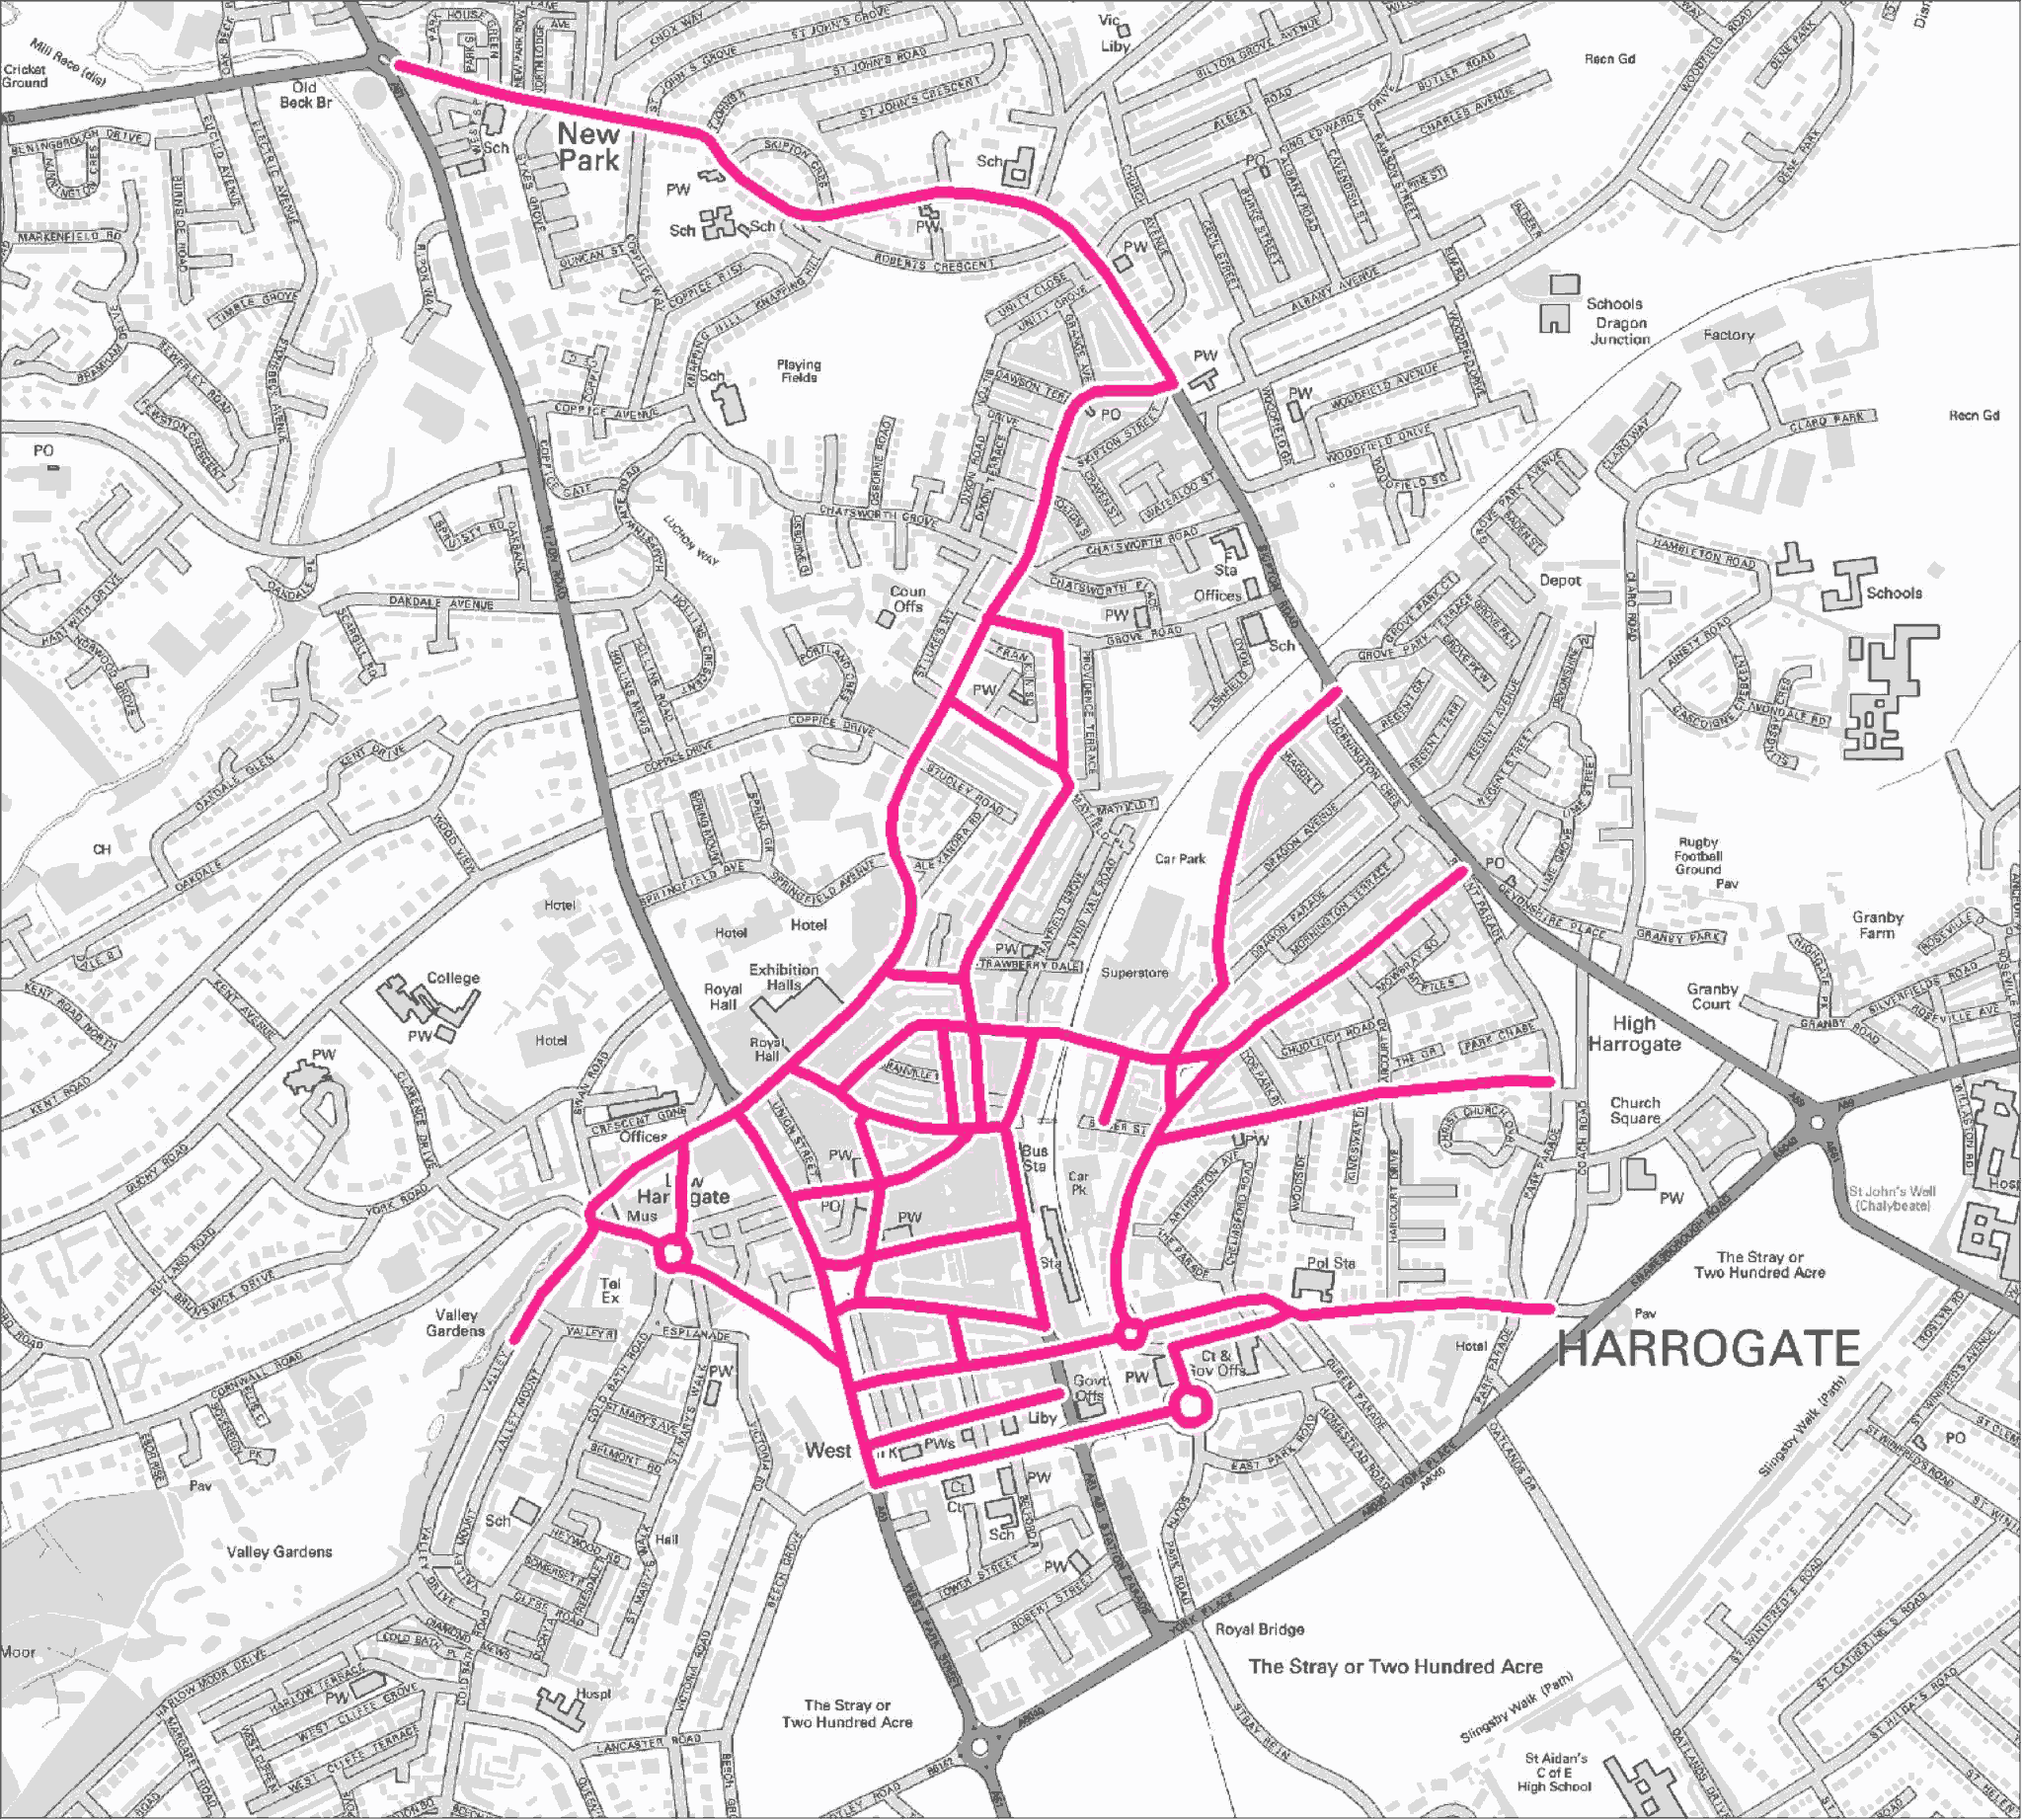 Harrogate footpath gritting map. Contact us for this information in a different format.